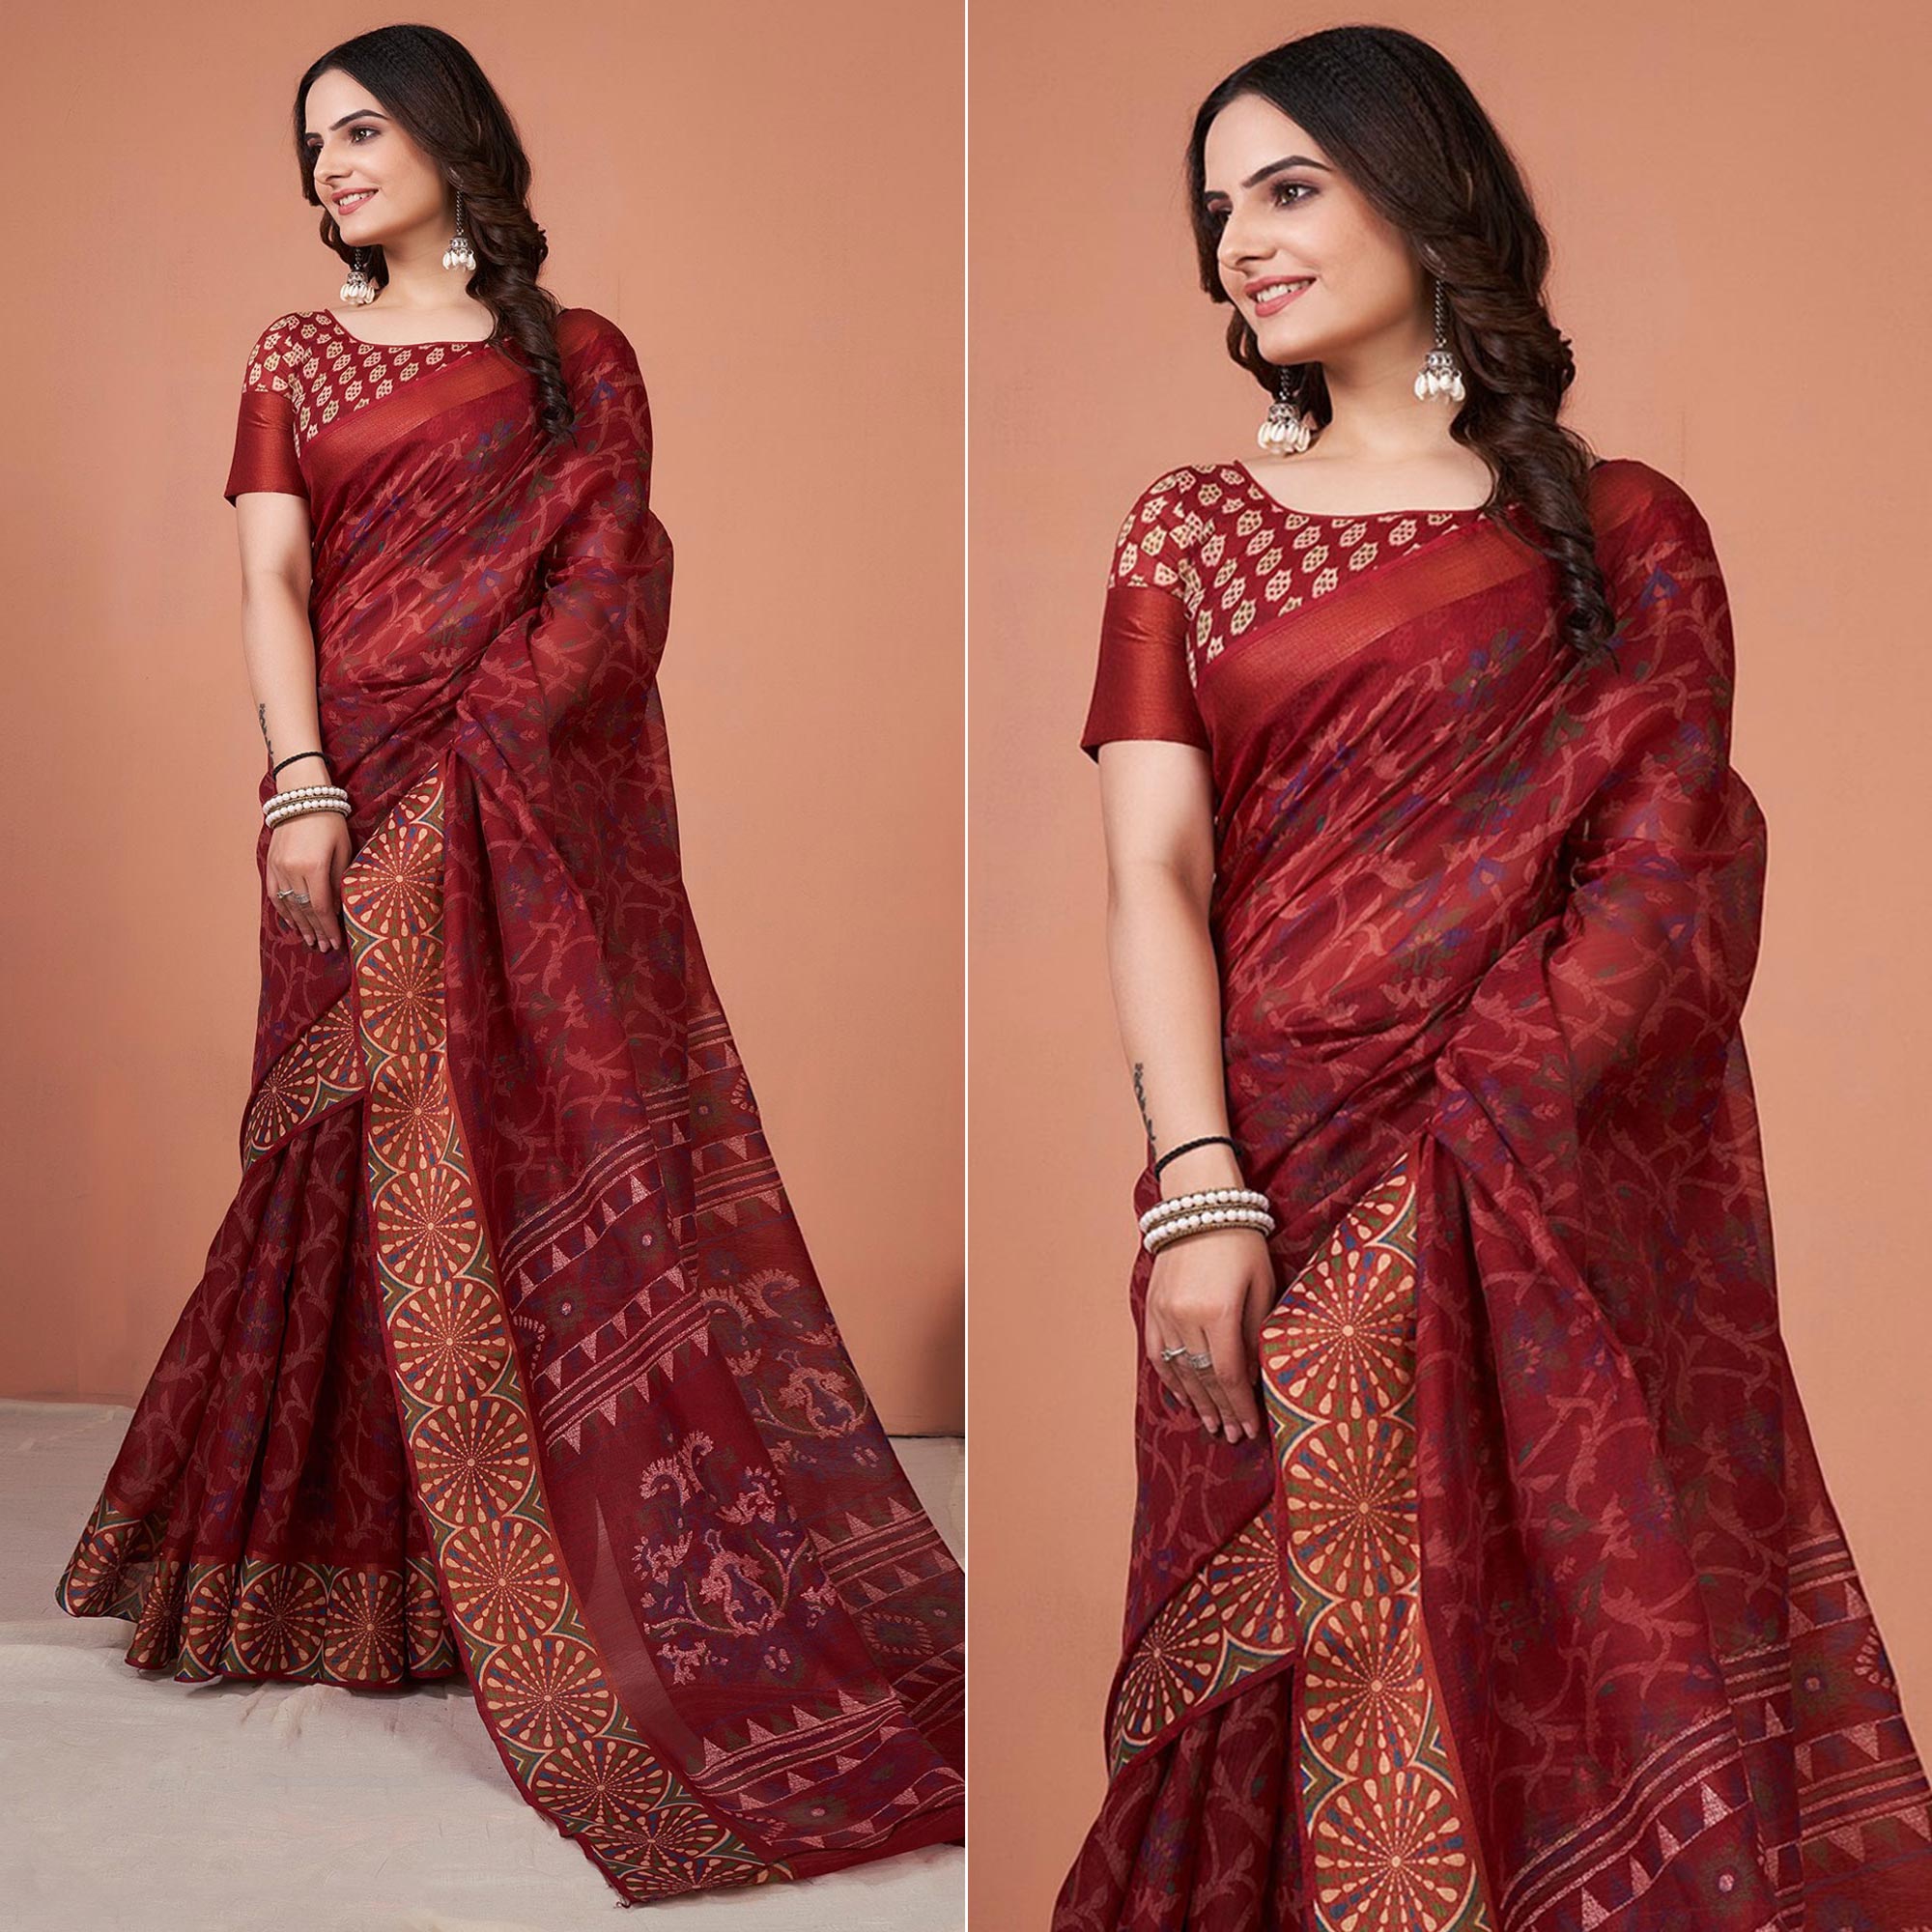 Maroon Printed Cotton Saree With Tassels